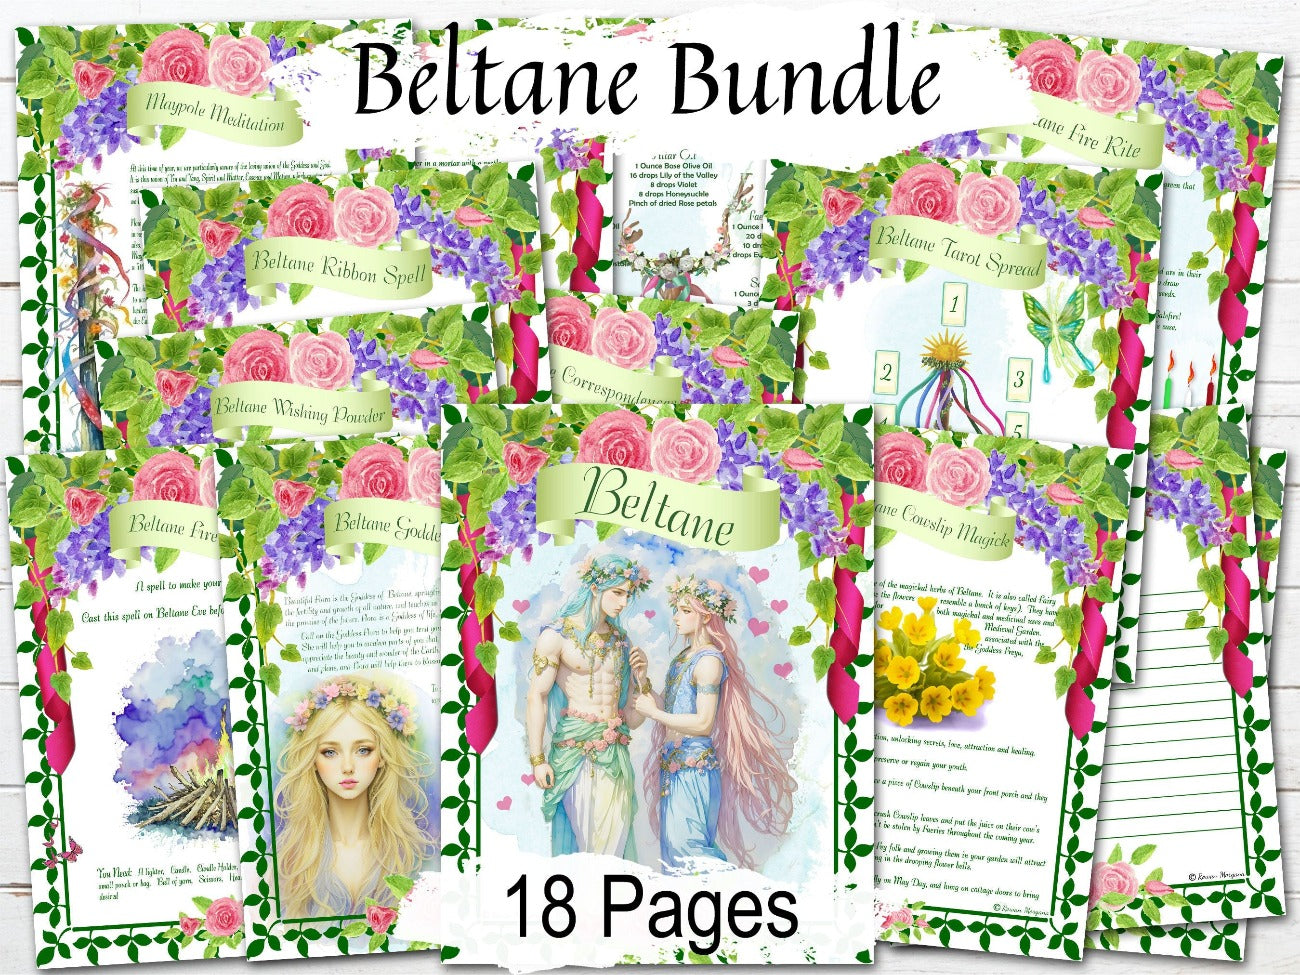 BELTANE WICCA SABBAT, White Background, Grimoire Printable Spellbook, Wheel of the Year Traditions, Meditation, Rituals, Spells, Oil & Incense Recipes - Morgana Magick Spell